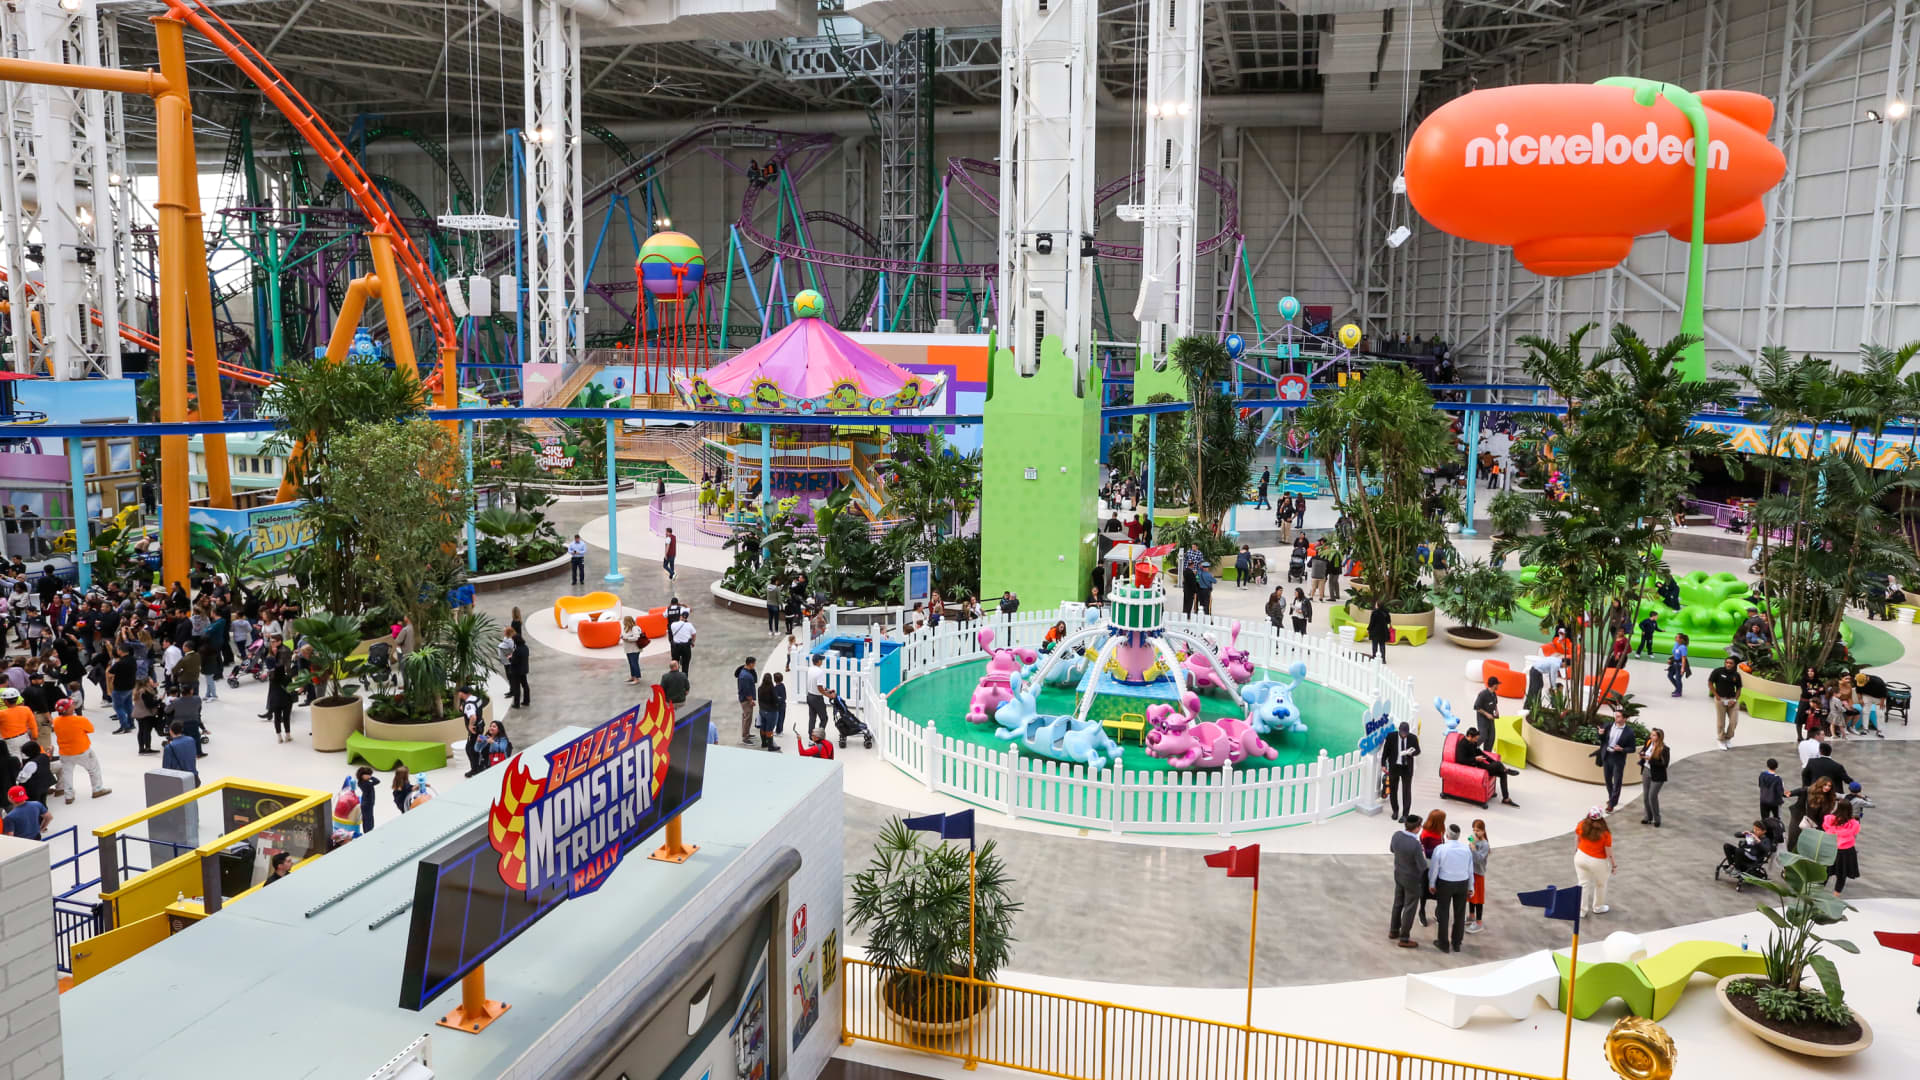 America's craziest shopping mall finally opens after 20 years